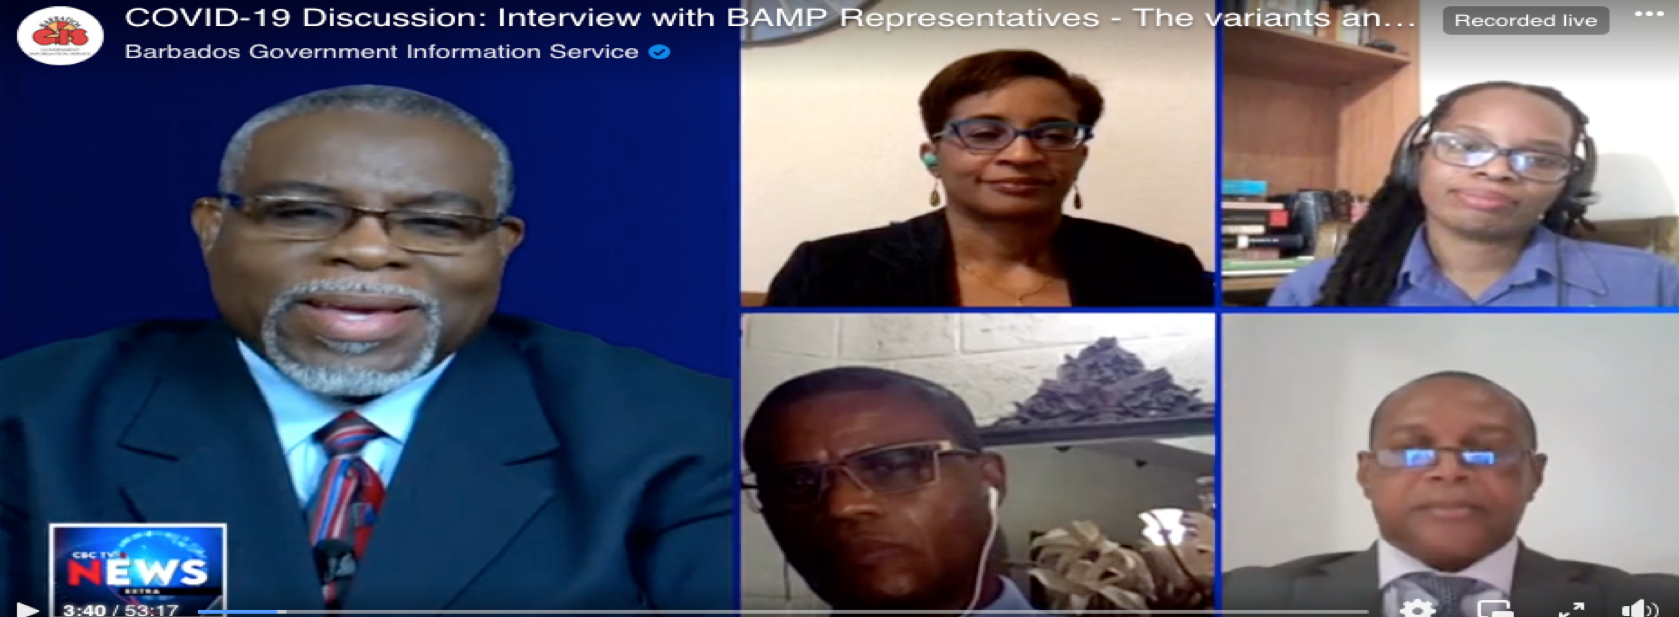 COVID-19 Discussion: Interview with BAMP Representatives - The variants and how they will impact our nation and our lives